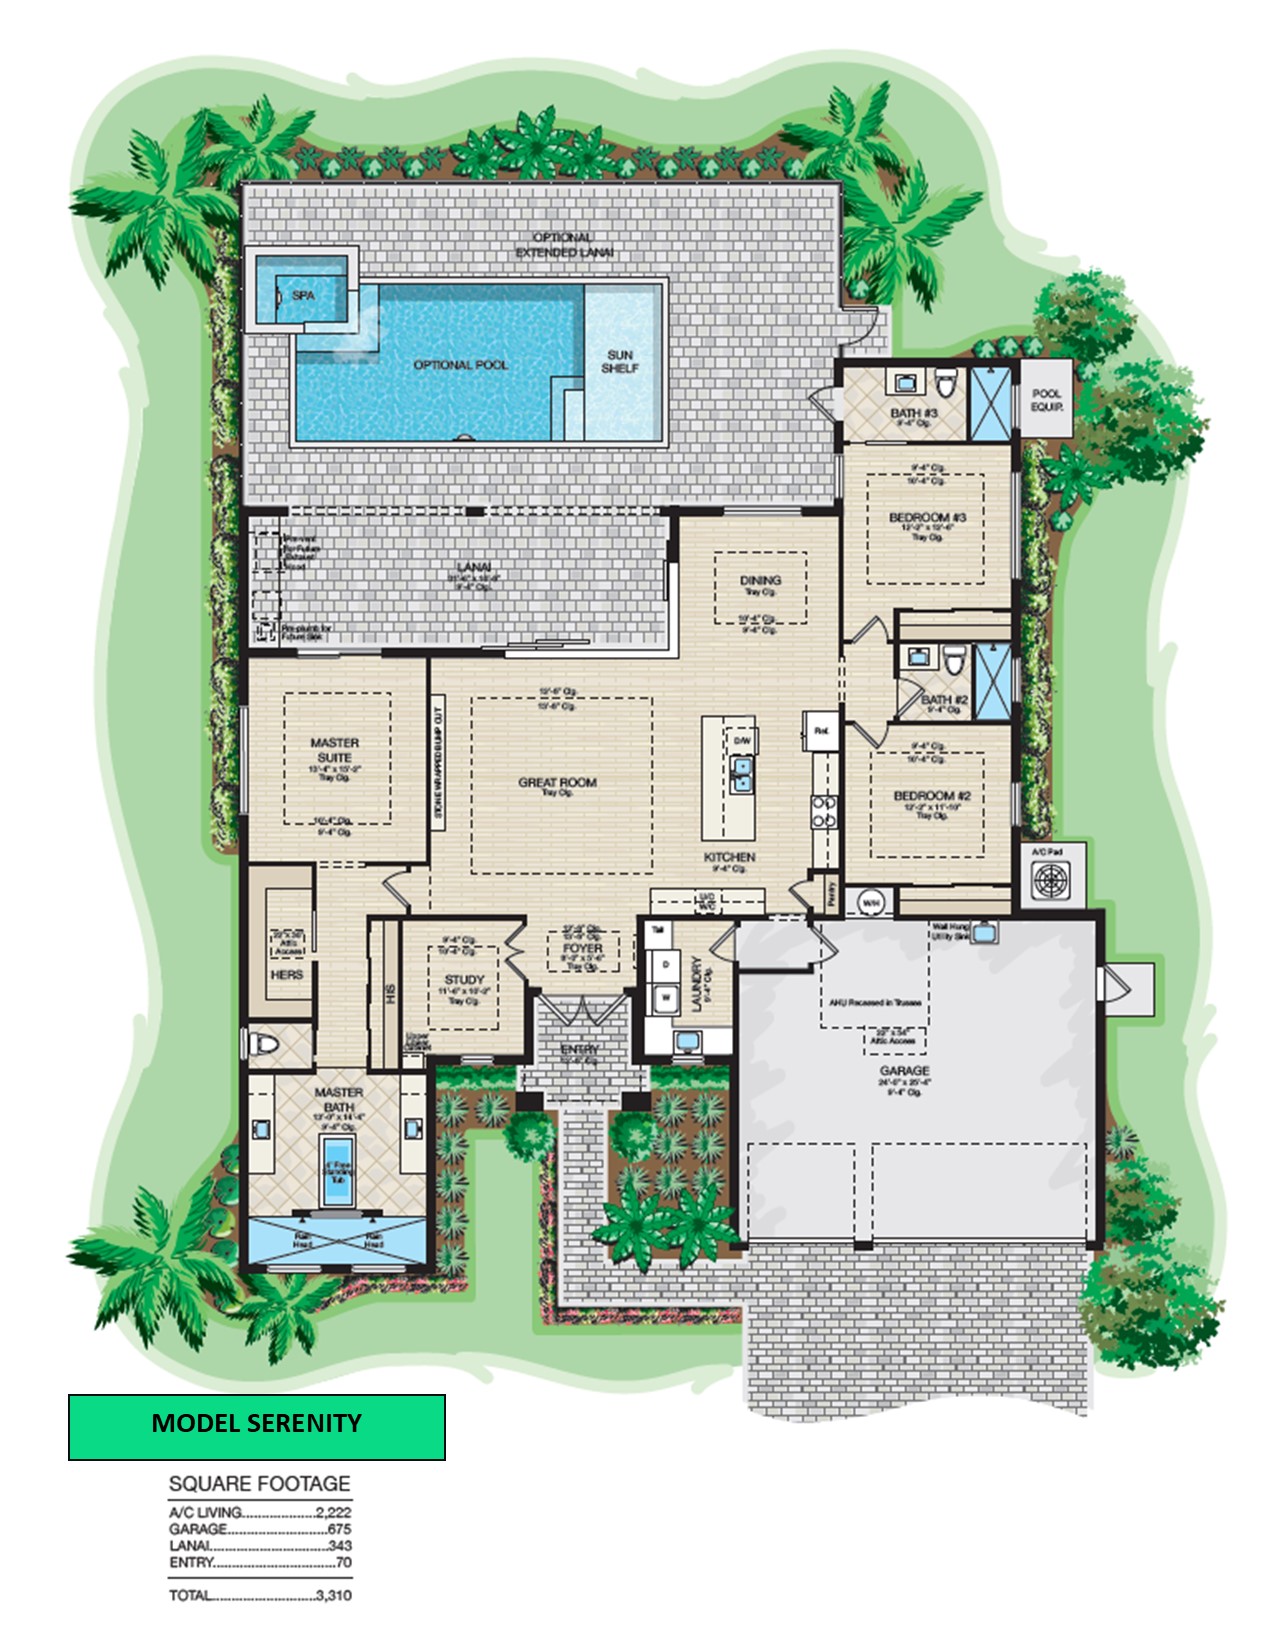 Picture of the artist rendering of the model home Serenity